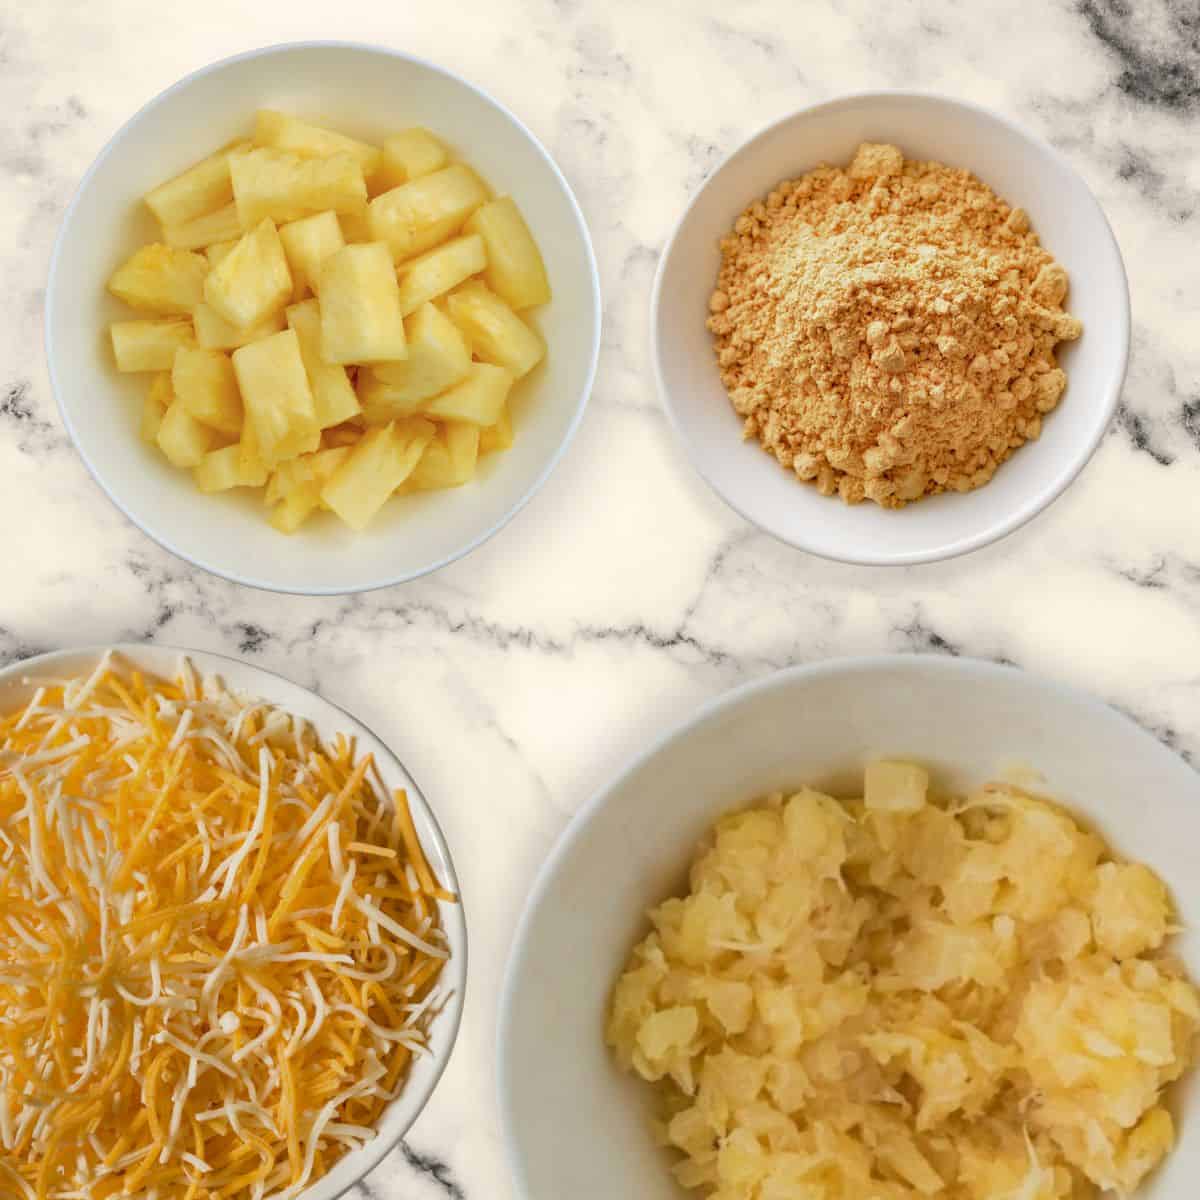 ingredients for pineapple casserole